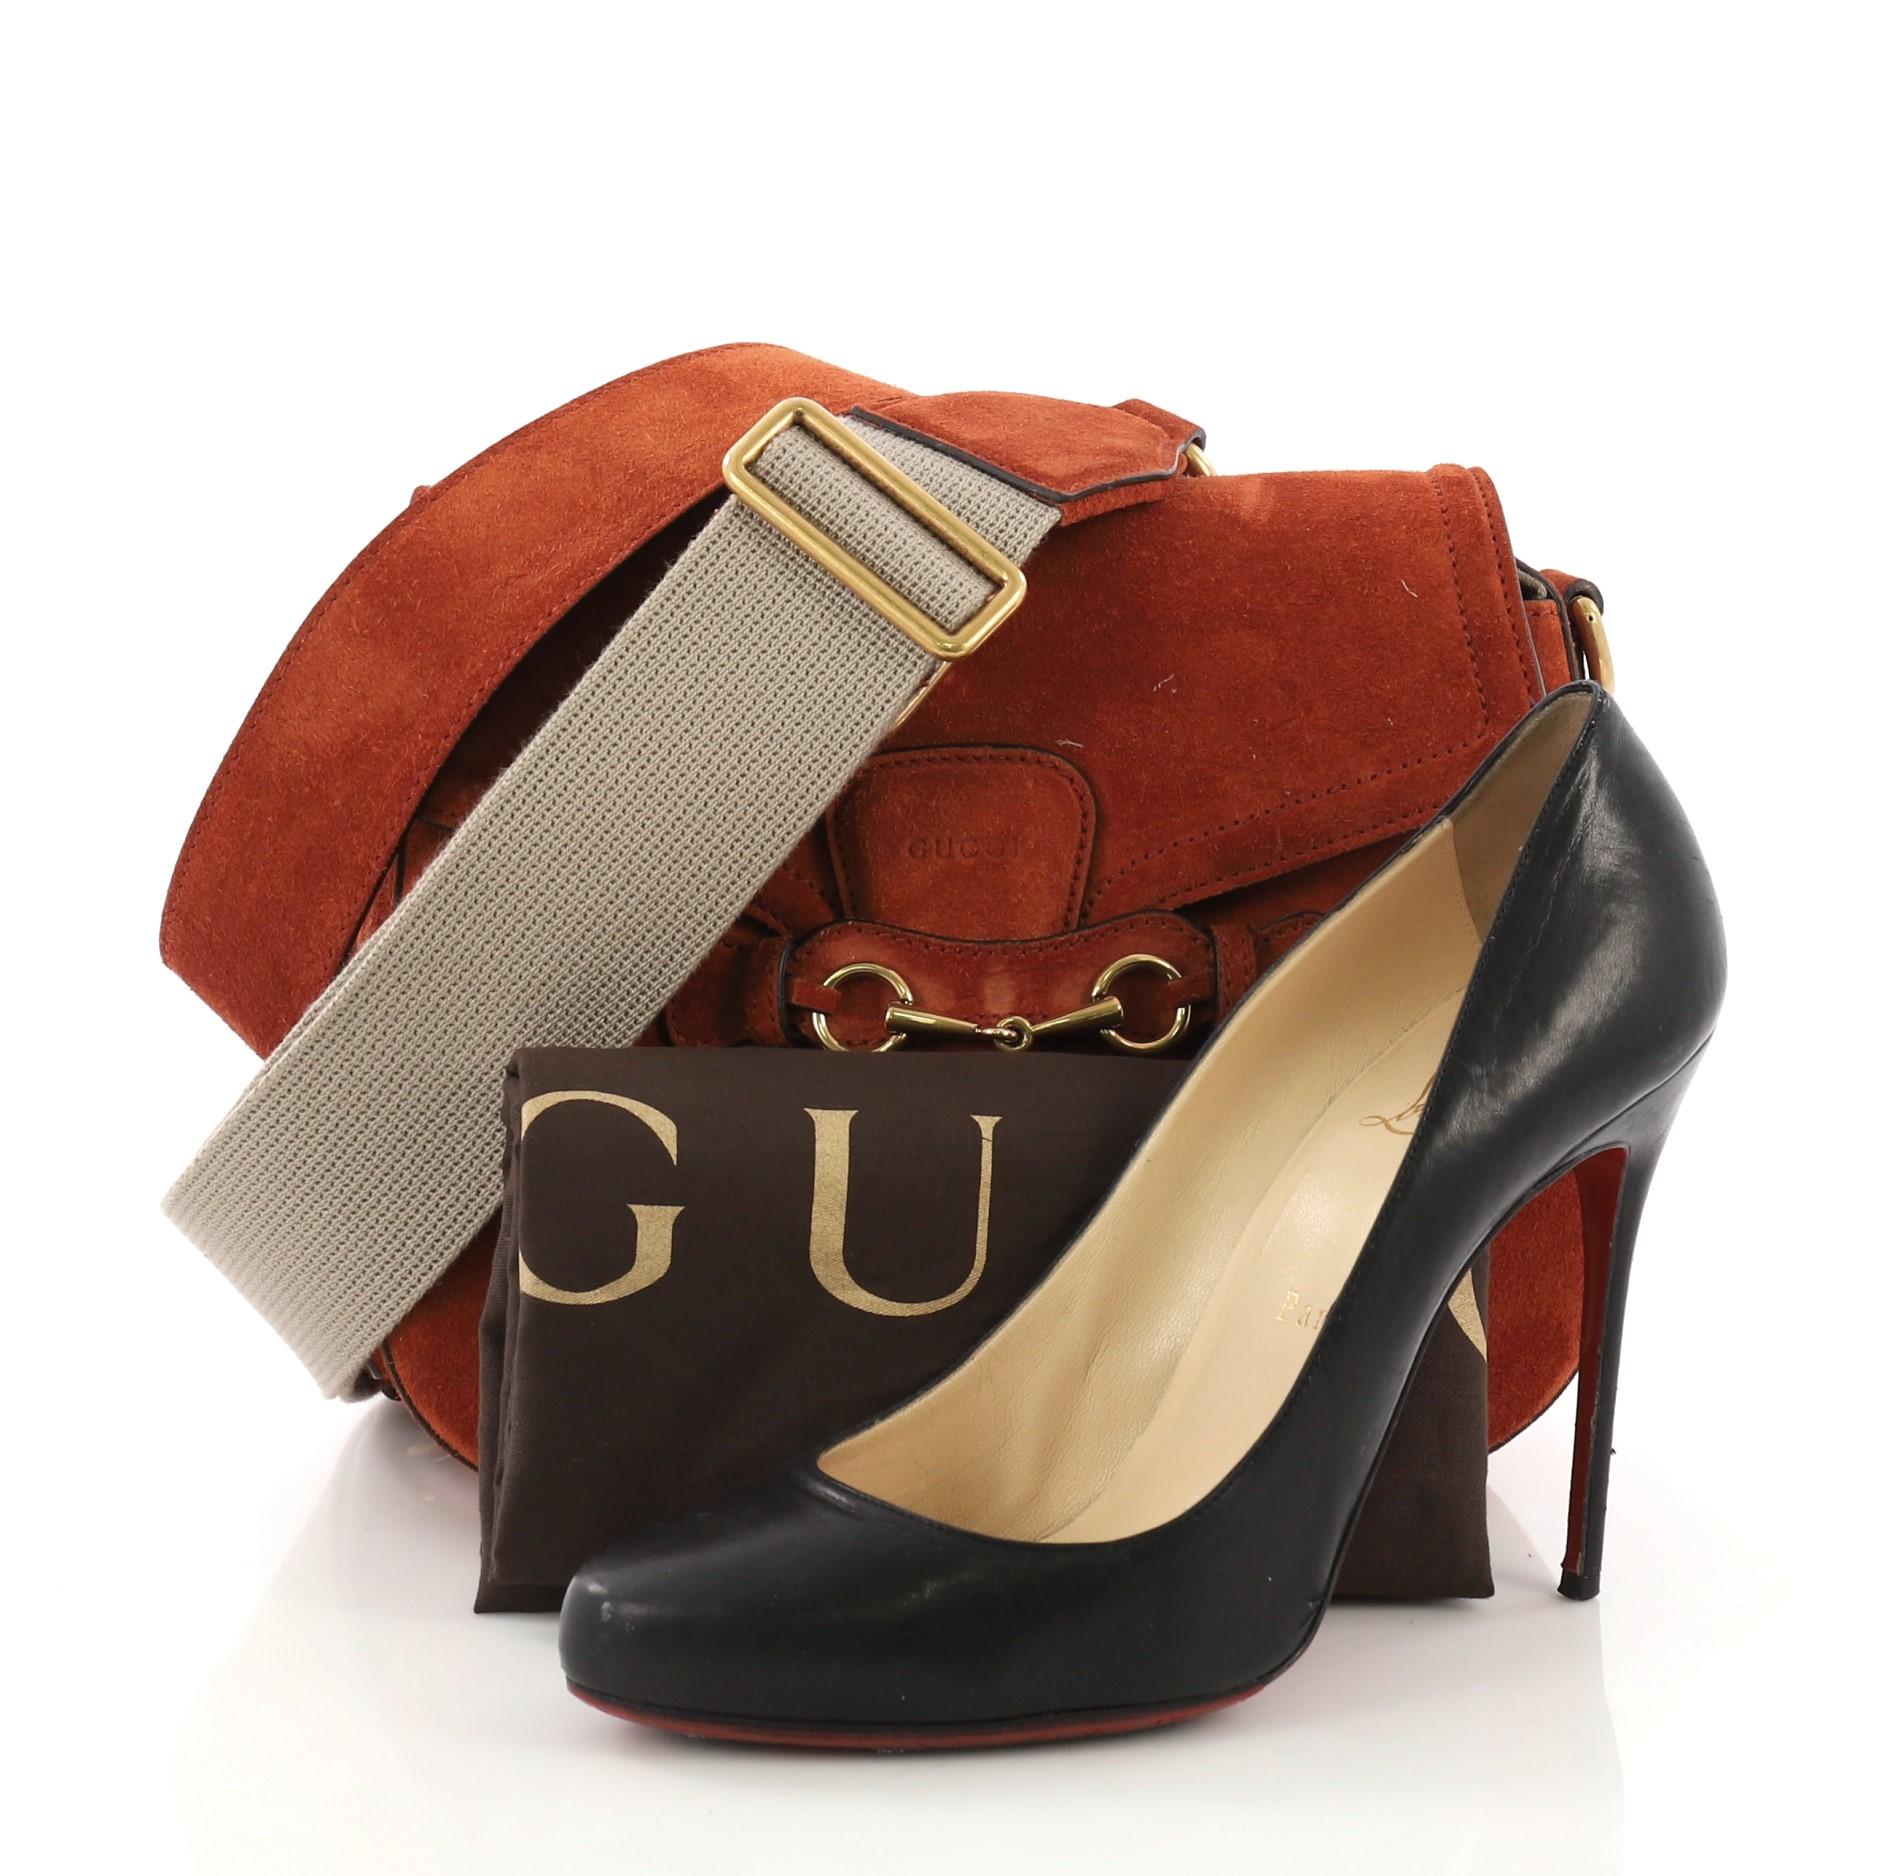 This Gucci Lady Web Shoulder Bag Suede Medium, crafted from orange suede, features an adjustable shoulder strap and aged gold-tone hardware. Its flap closure with horsebit buckle detail opens to a beige suede interior. **Note: Shoe photographed is